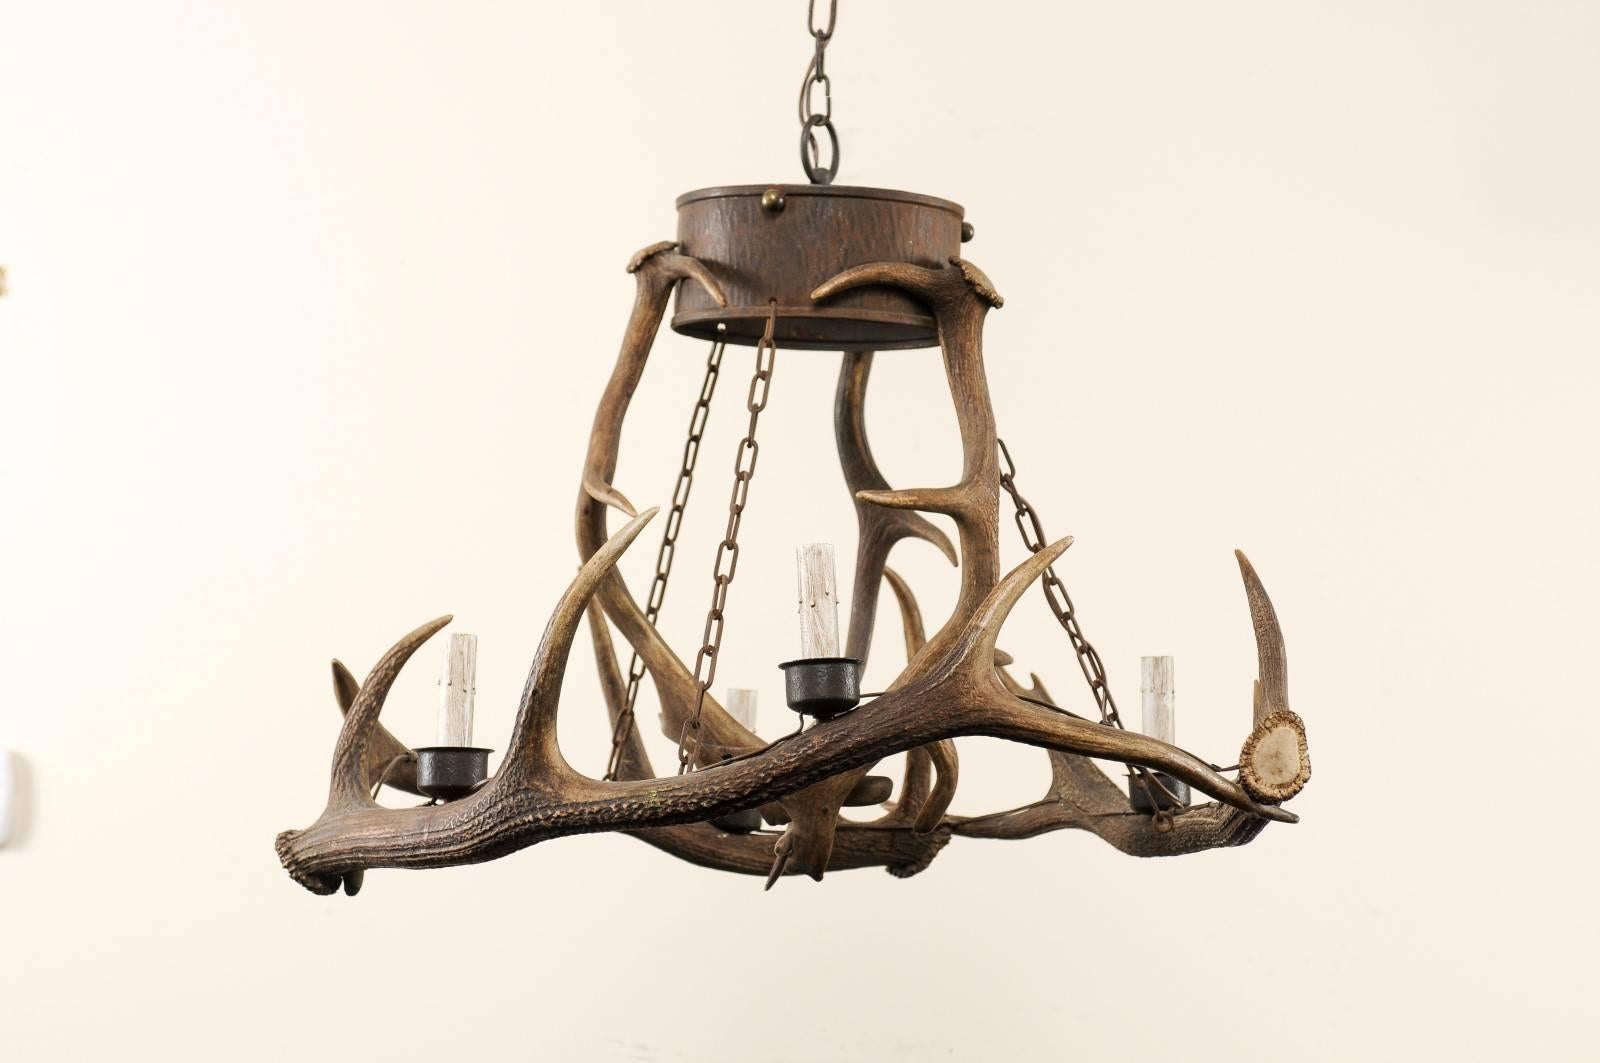 A French deer antlers chandelier. This four-light French vintage chandelier features interlocked deer antlers, which make up a round-shaped body and are connected to an upper metal ring with links, circa 1950. This French midcentury antler